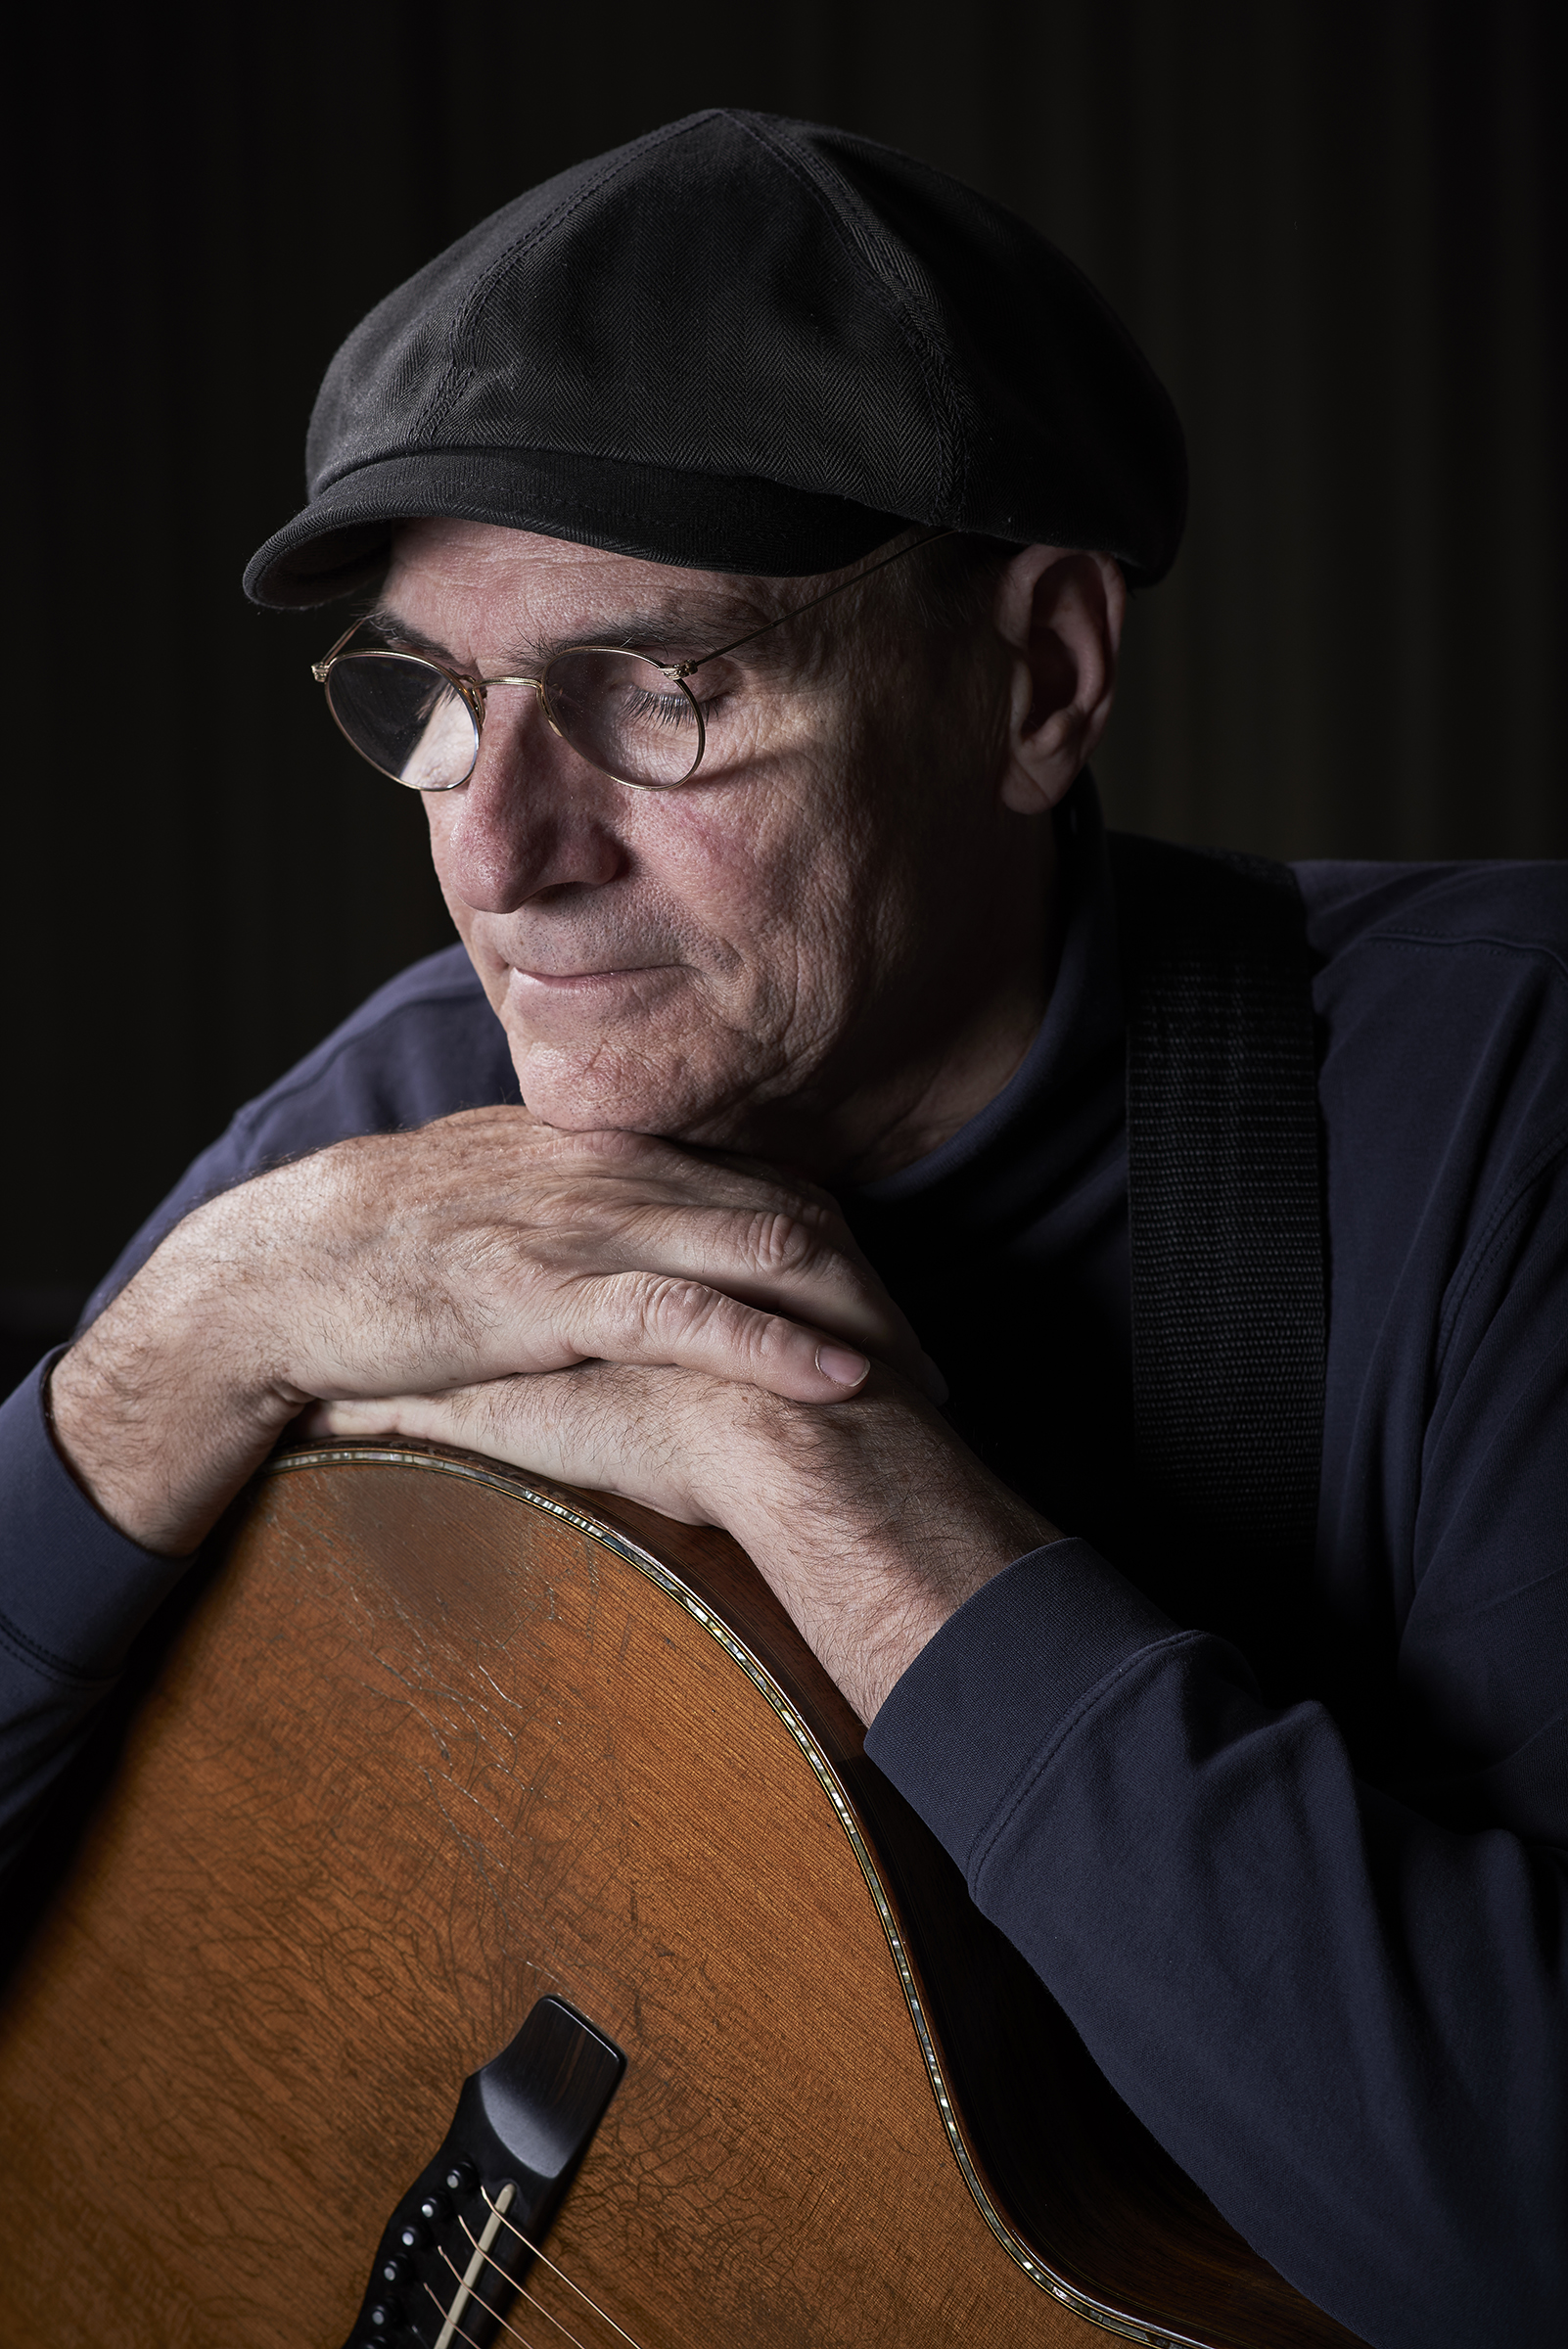 At 71, James Taylor looks back—and settles in for an encore